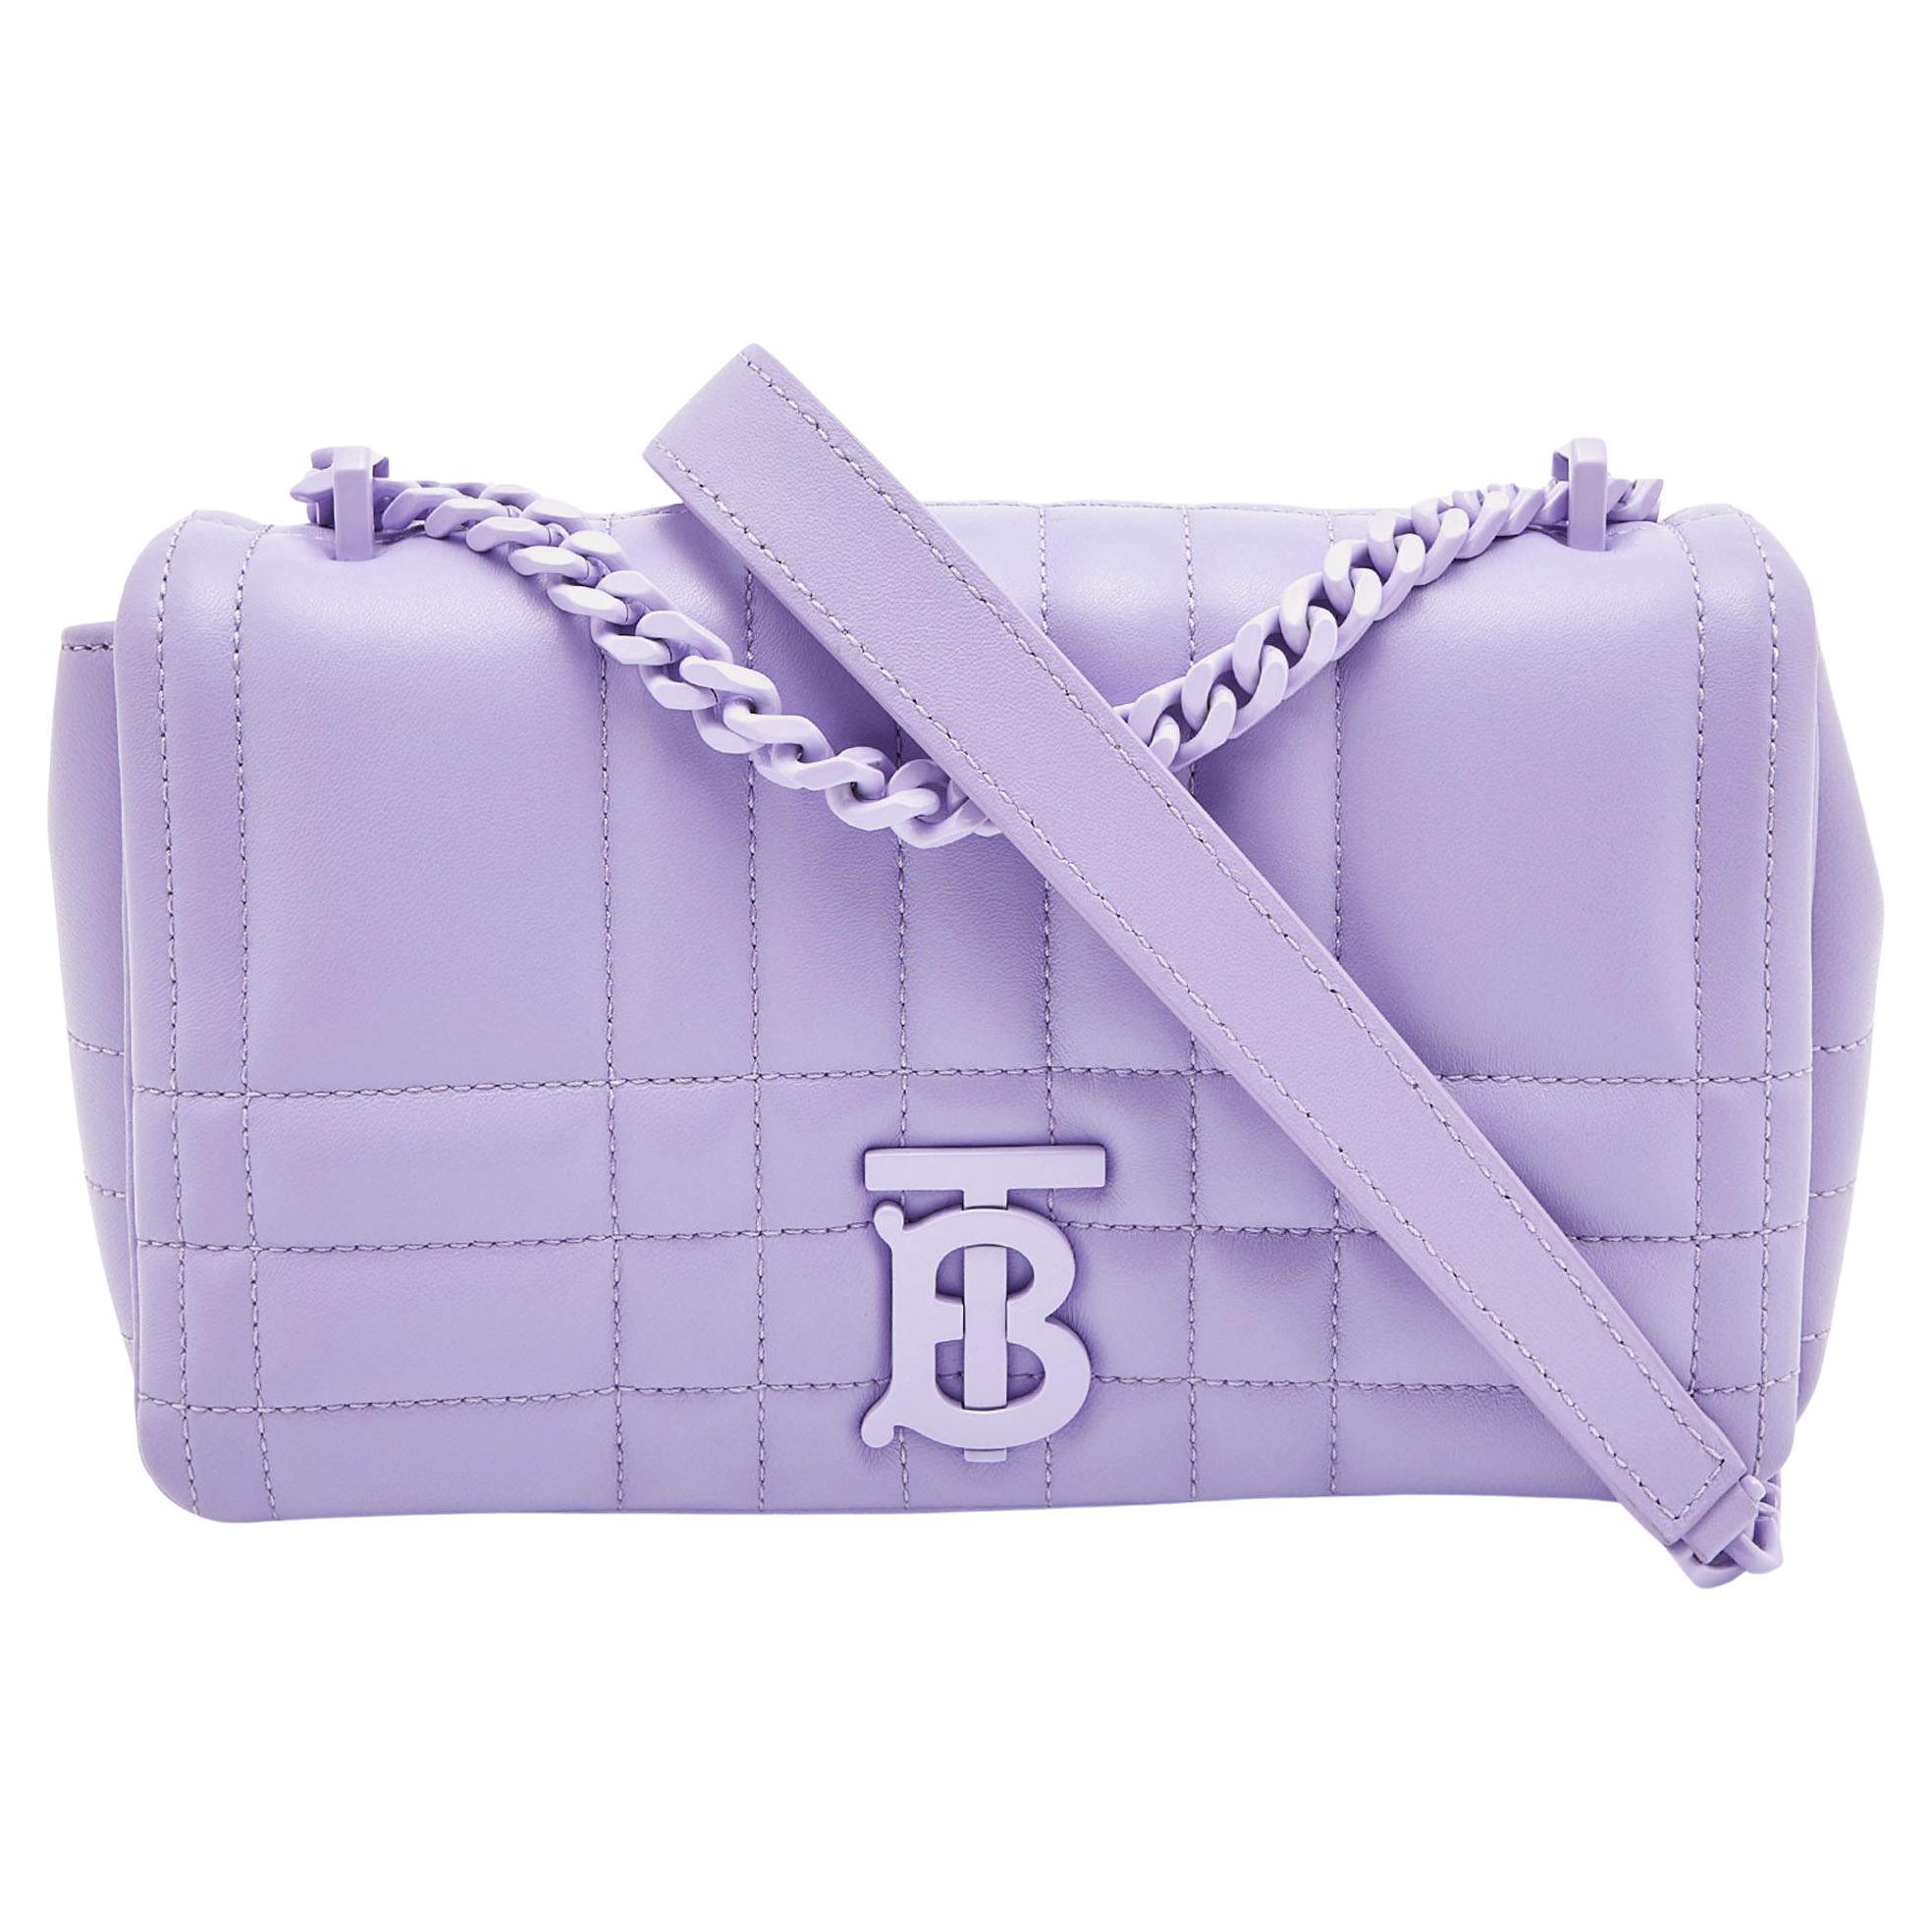 Burberry Lavender Quilted Leather Small Lola Shoulder Bag